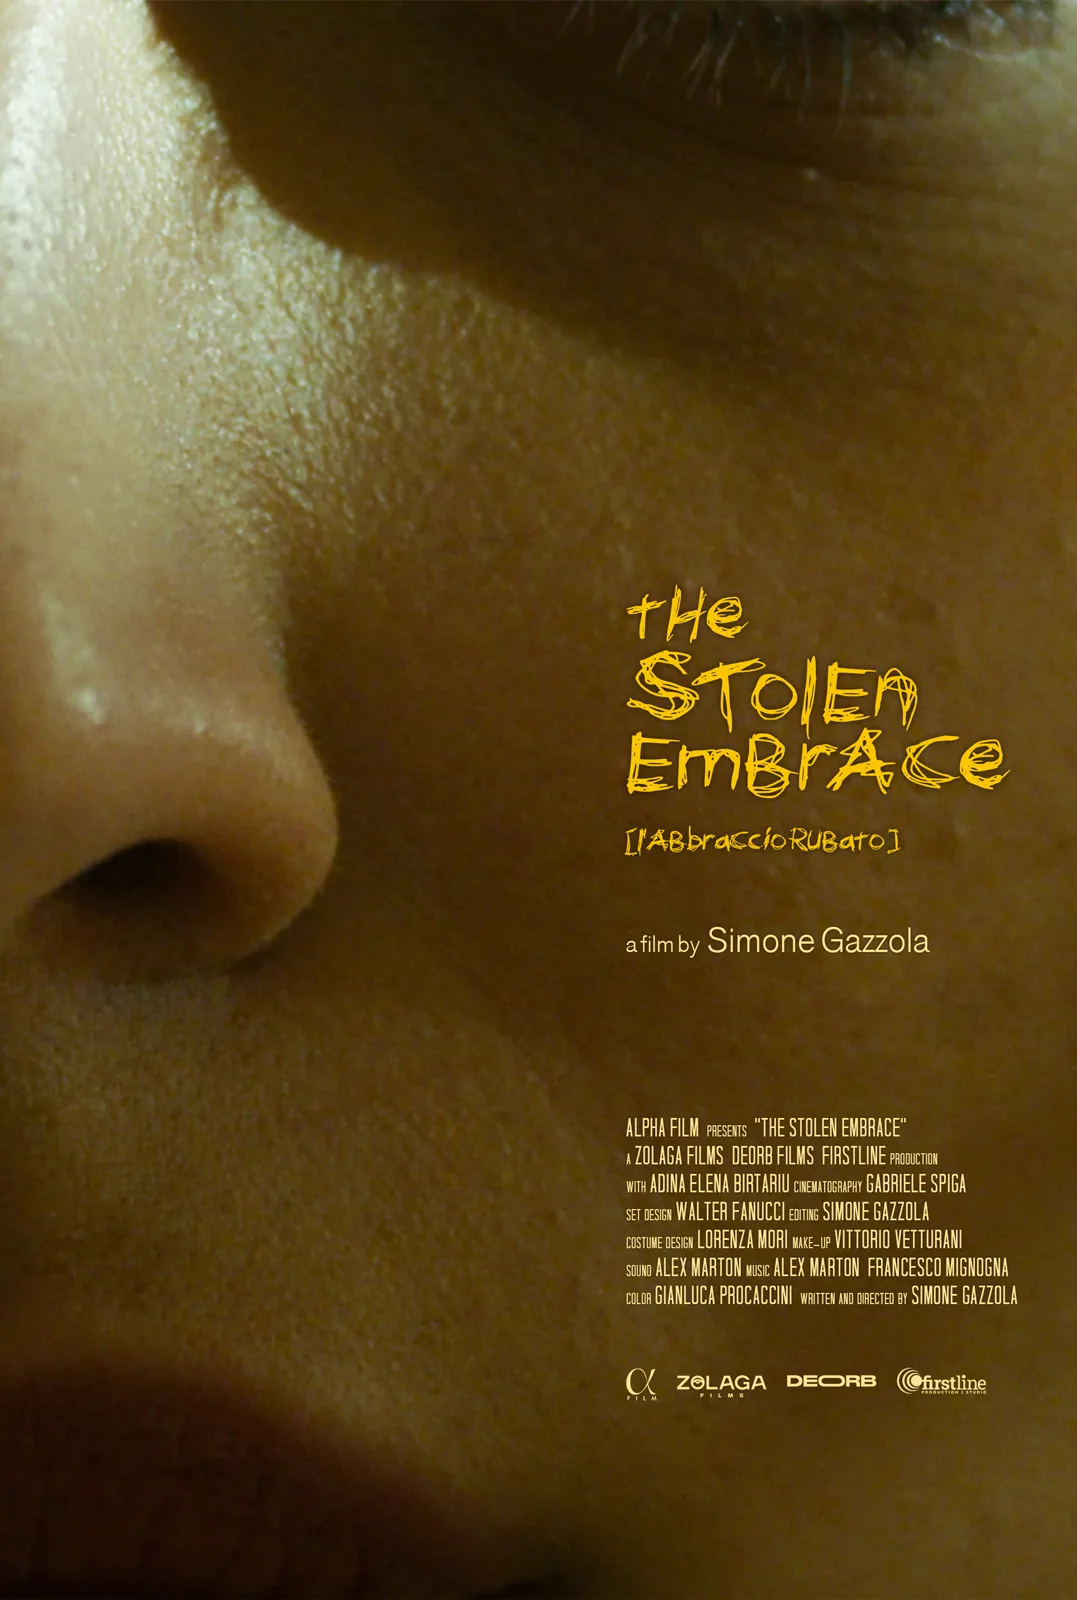 Poster of the short film "The stolen embrace"